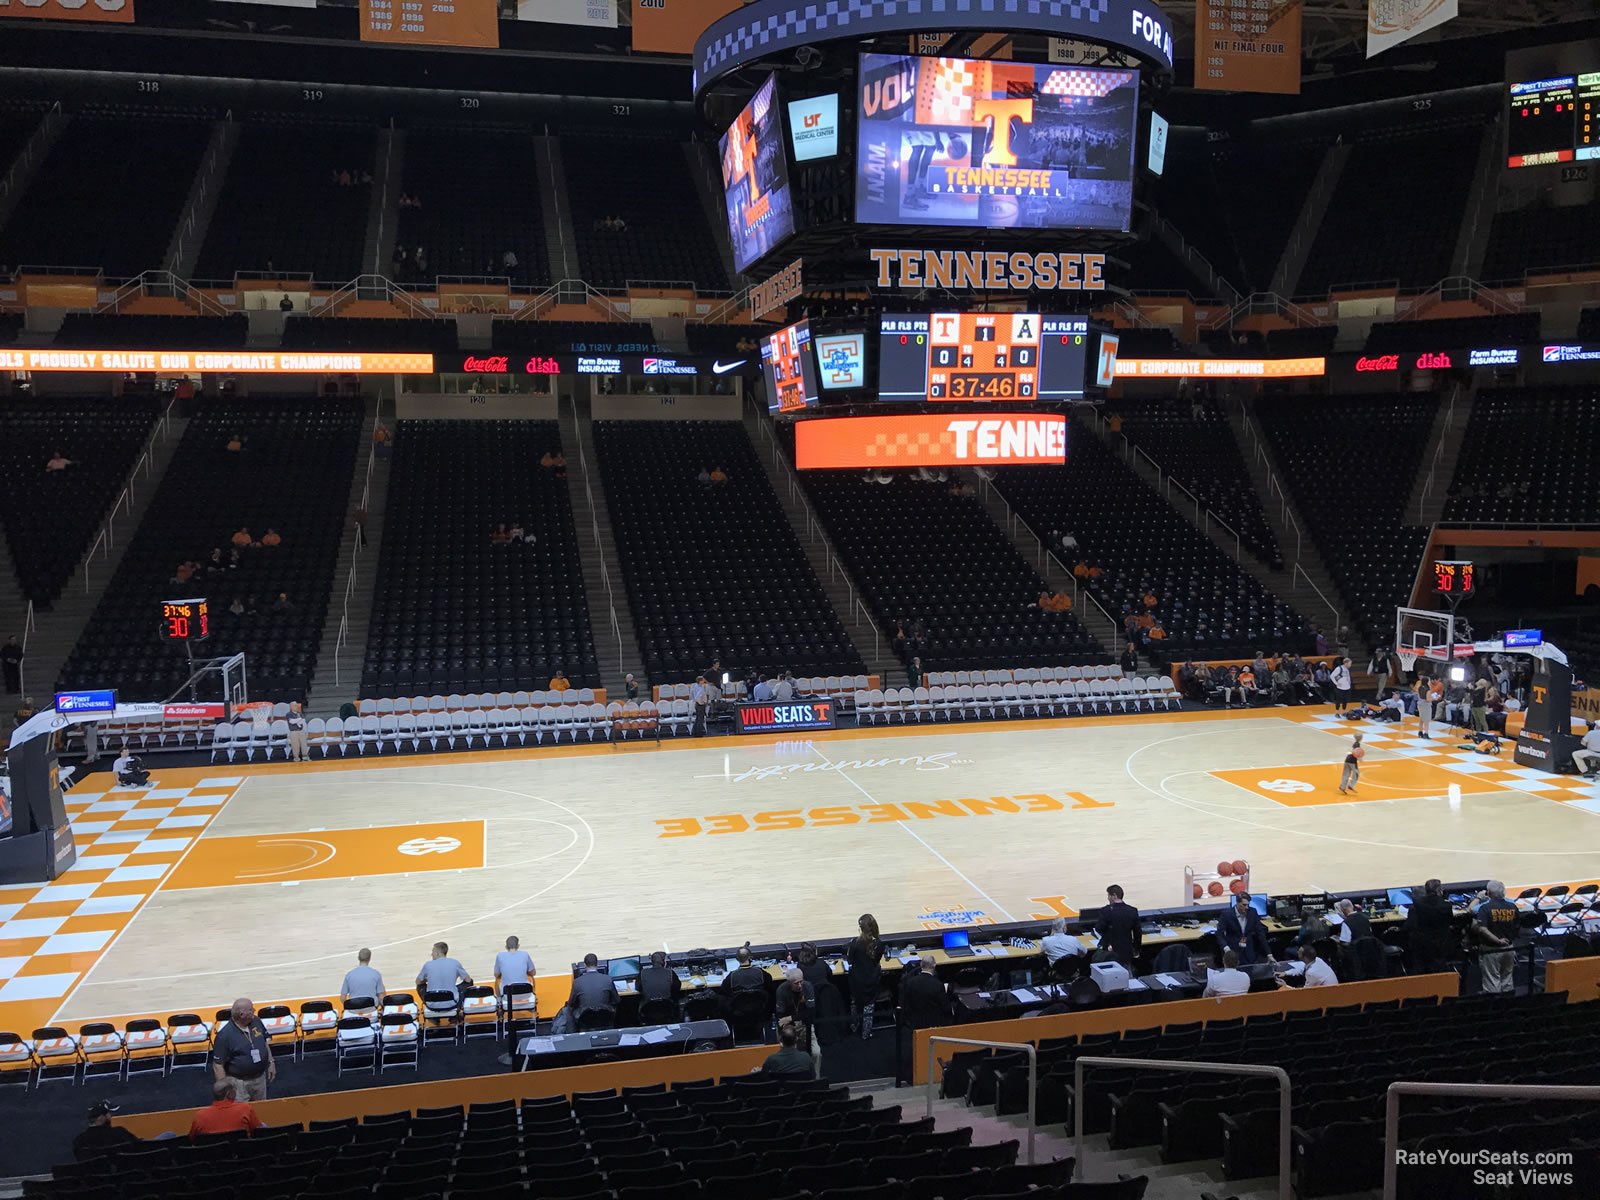 section 106, row 17 seat view  - thompson-boling arena